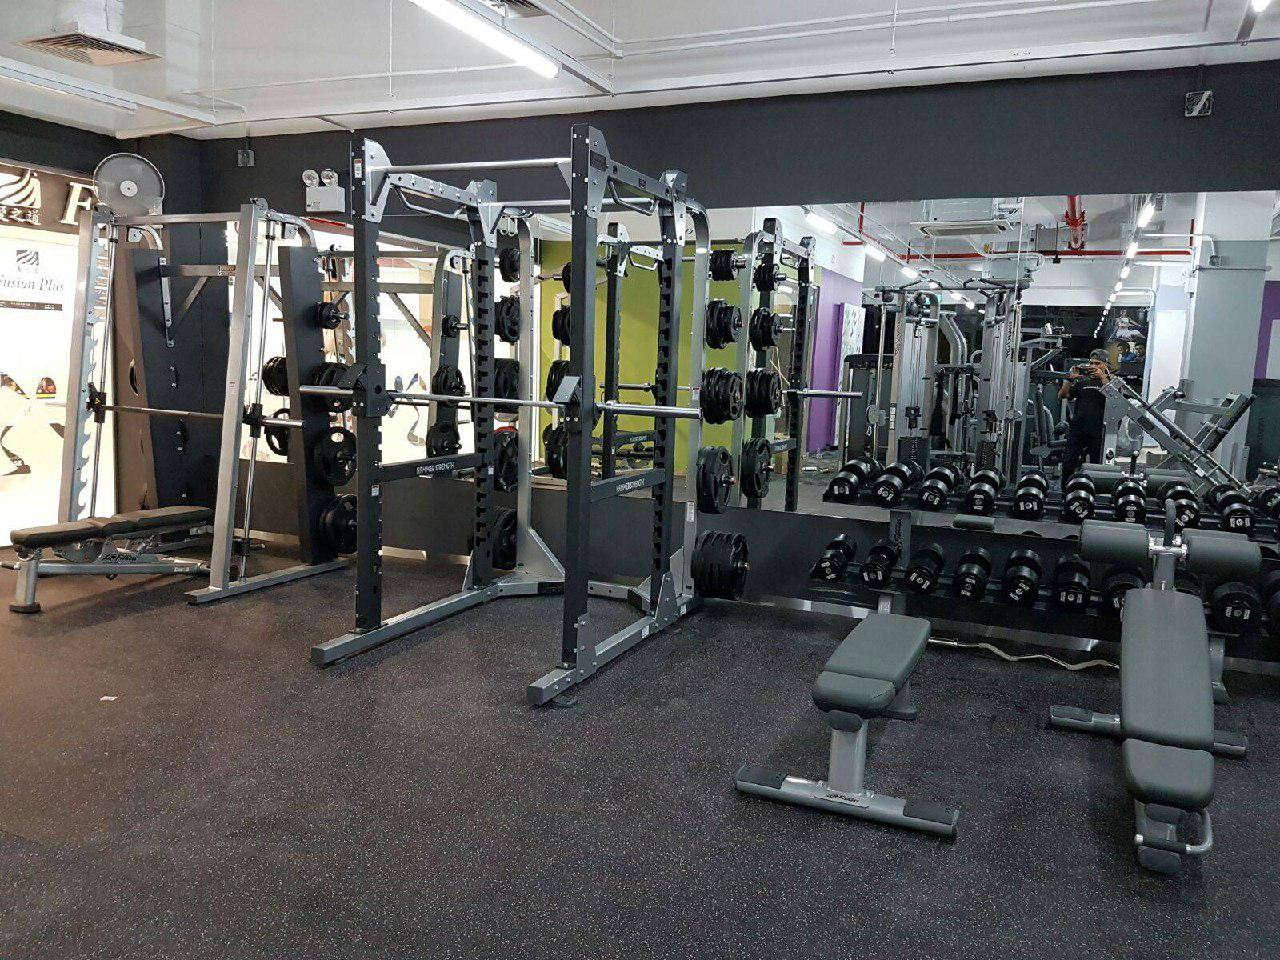 24 hour gyms singapore - Anytime Fitness